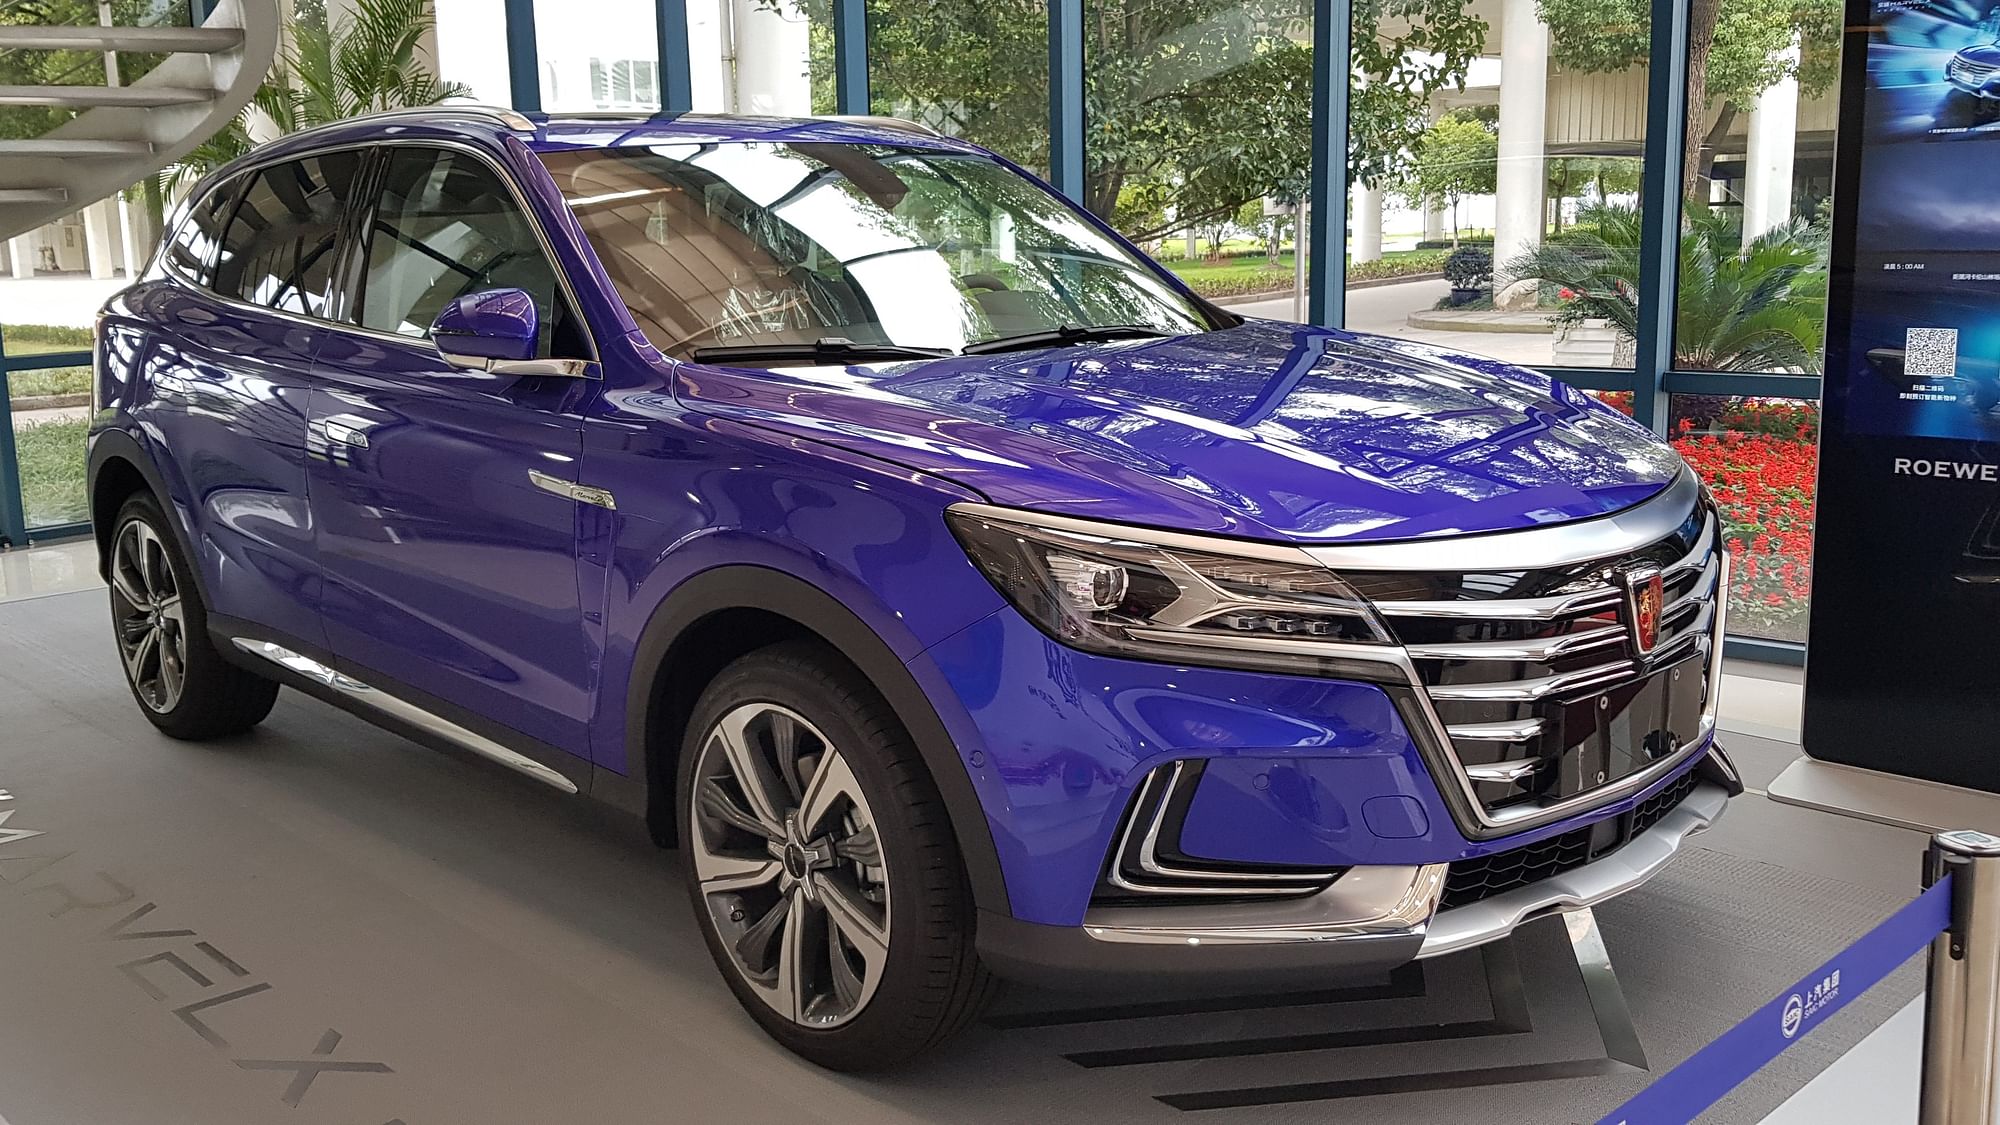 The Roewe Marvel X is an all-electric SUV owned by MG Motor’s parent company SAIC.